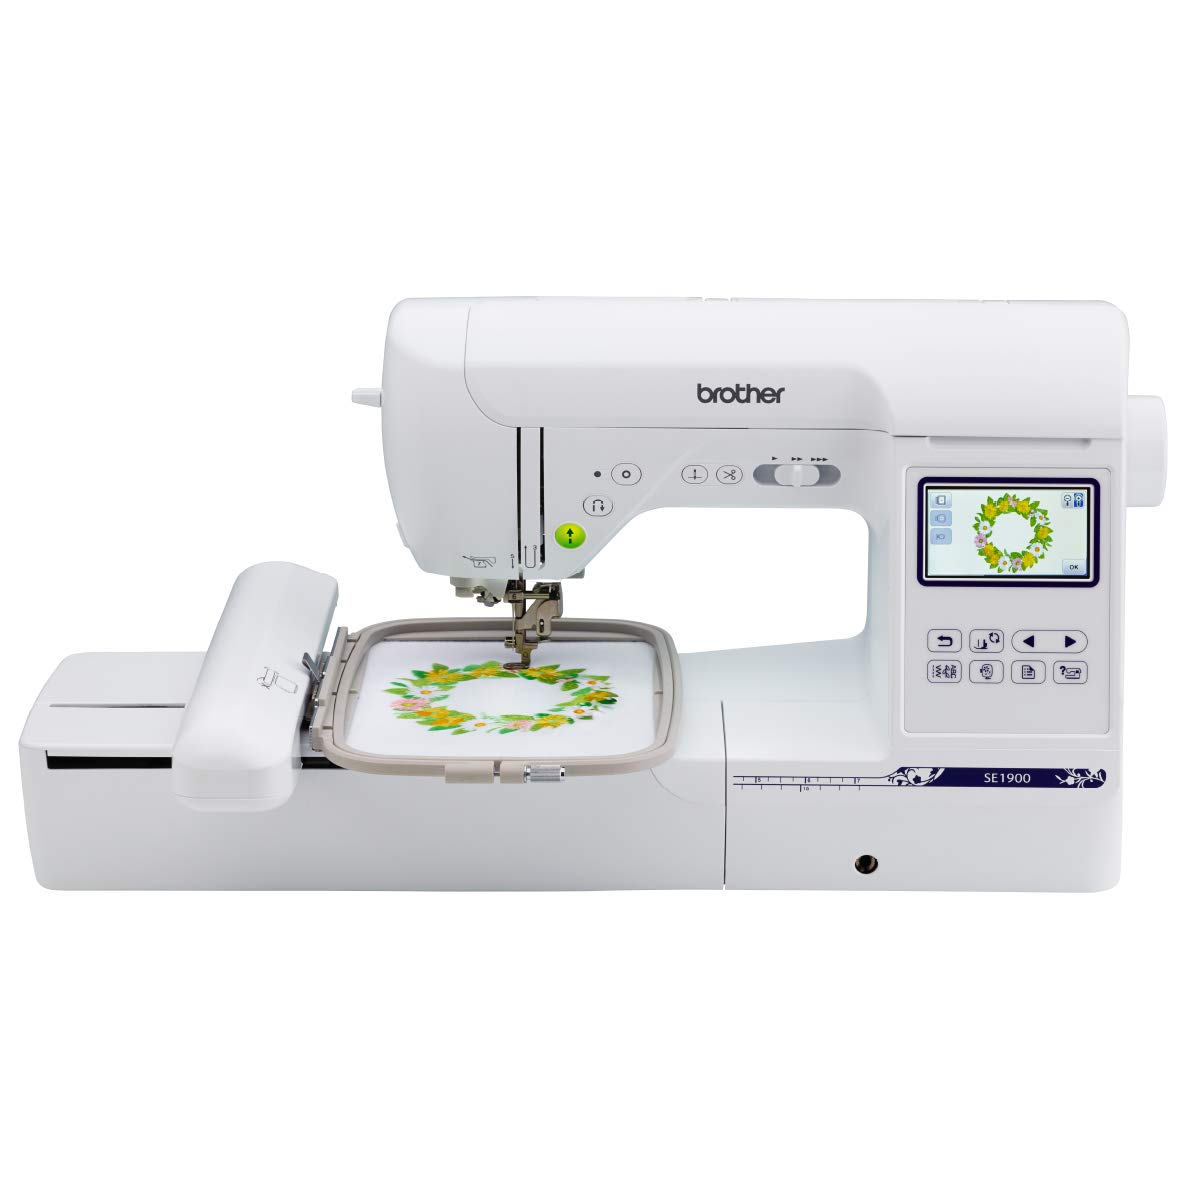 Brother Embroidery Machine, SE1900, 138 Embroidery Designs, 240 Built-in Sewing Stitches, Computerized Sewing and Embroidery, 5" x 7" Embroidery Area, 3.2" LCD Touchscreen Display, 8 Included Sewing Feet